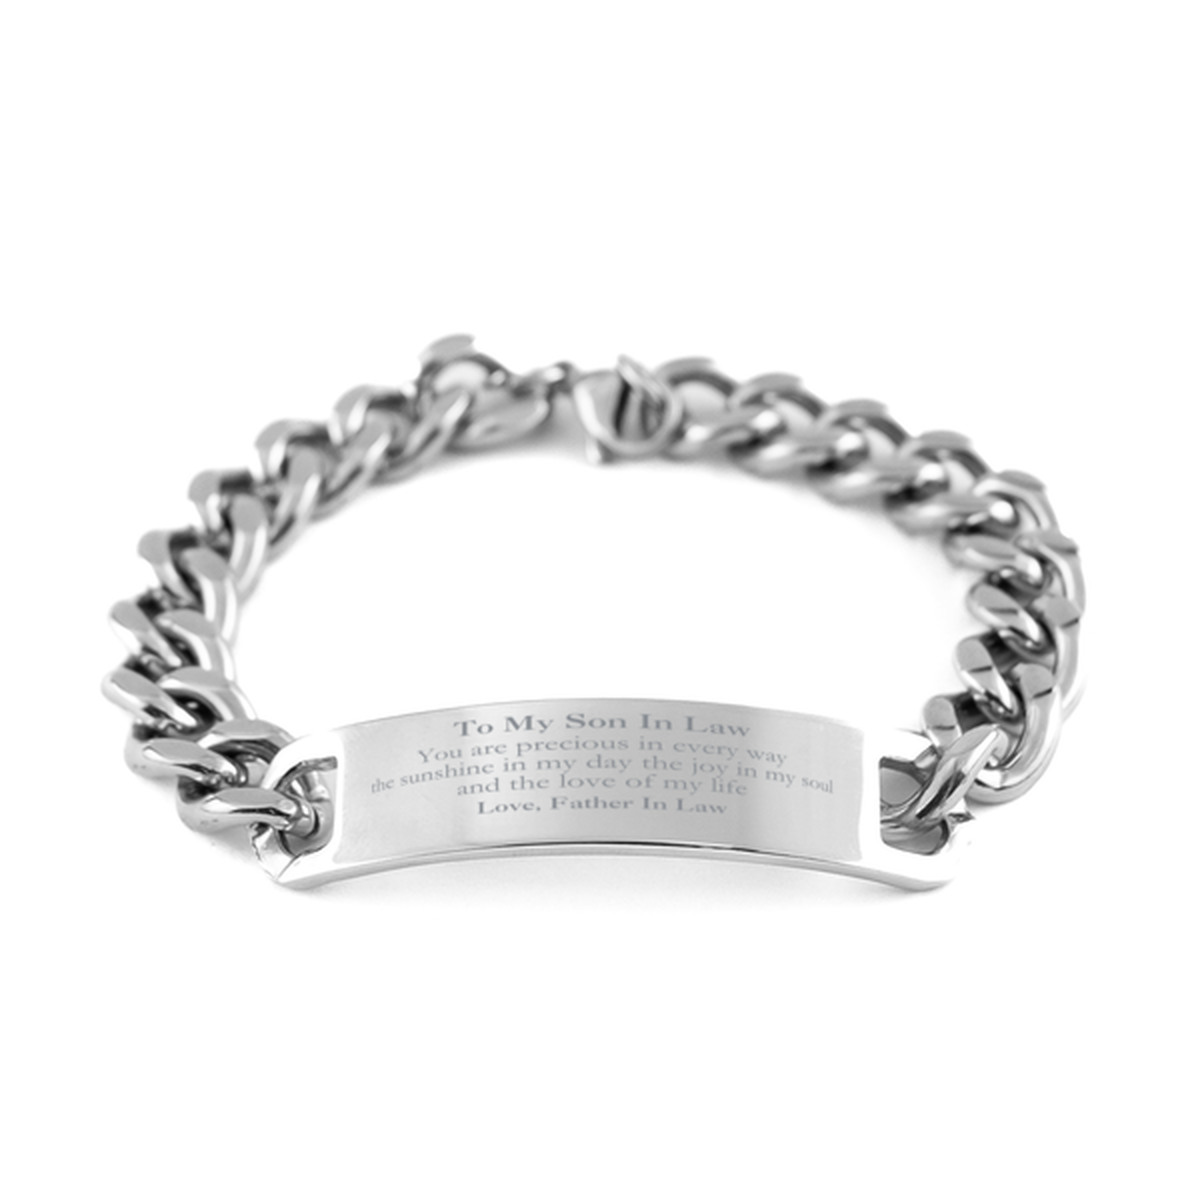 Graduation Gifts for Son In Law Cuban Chain Stainless Steel Bracelet Present from Father In Law, Christmas Son In Law Birthday Gifts Son In Law You are precious in every way the sunshine in my day. Love, Father In Law